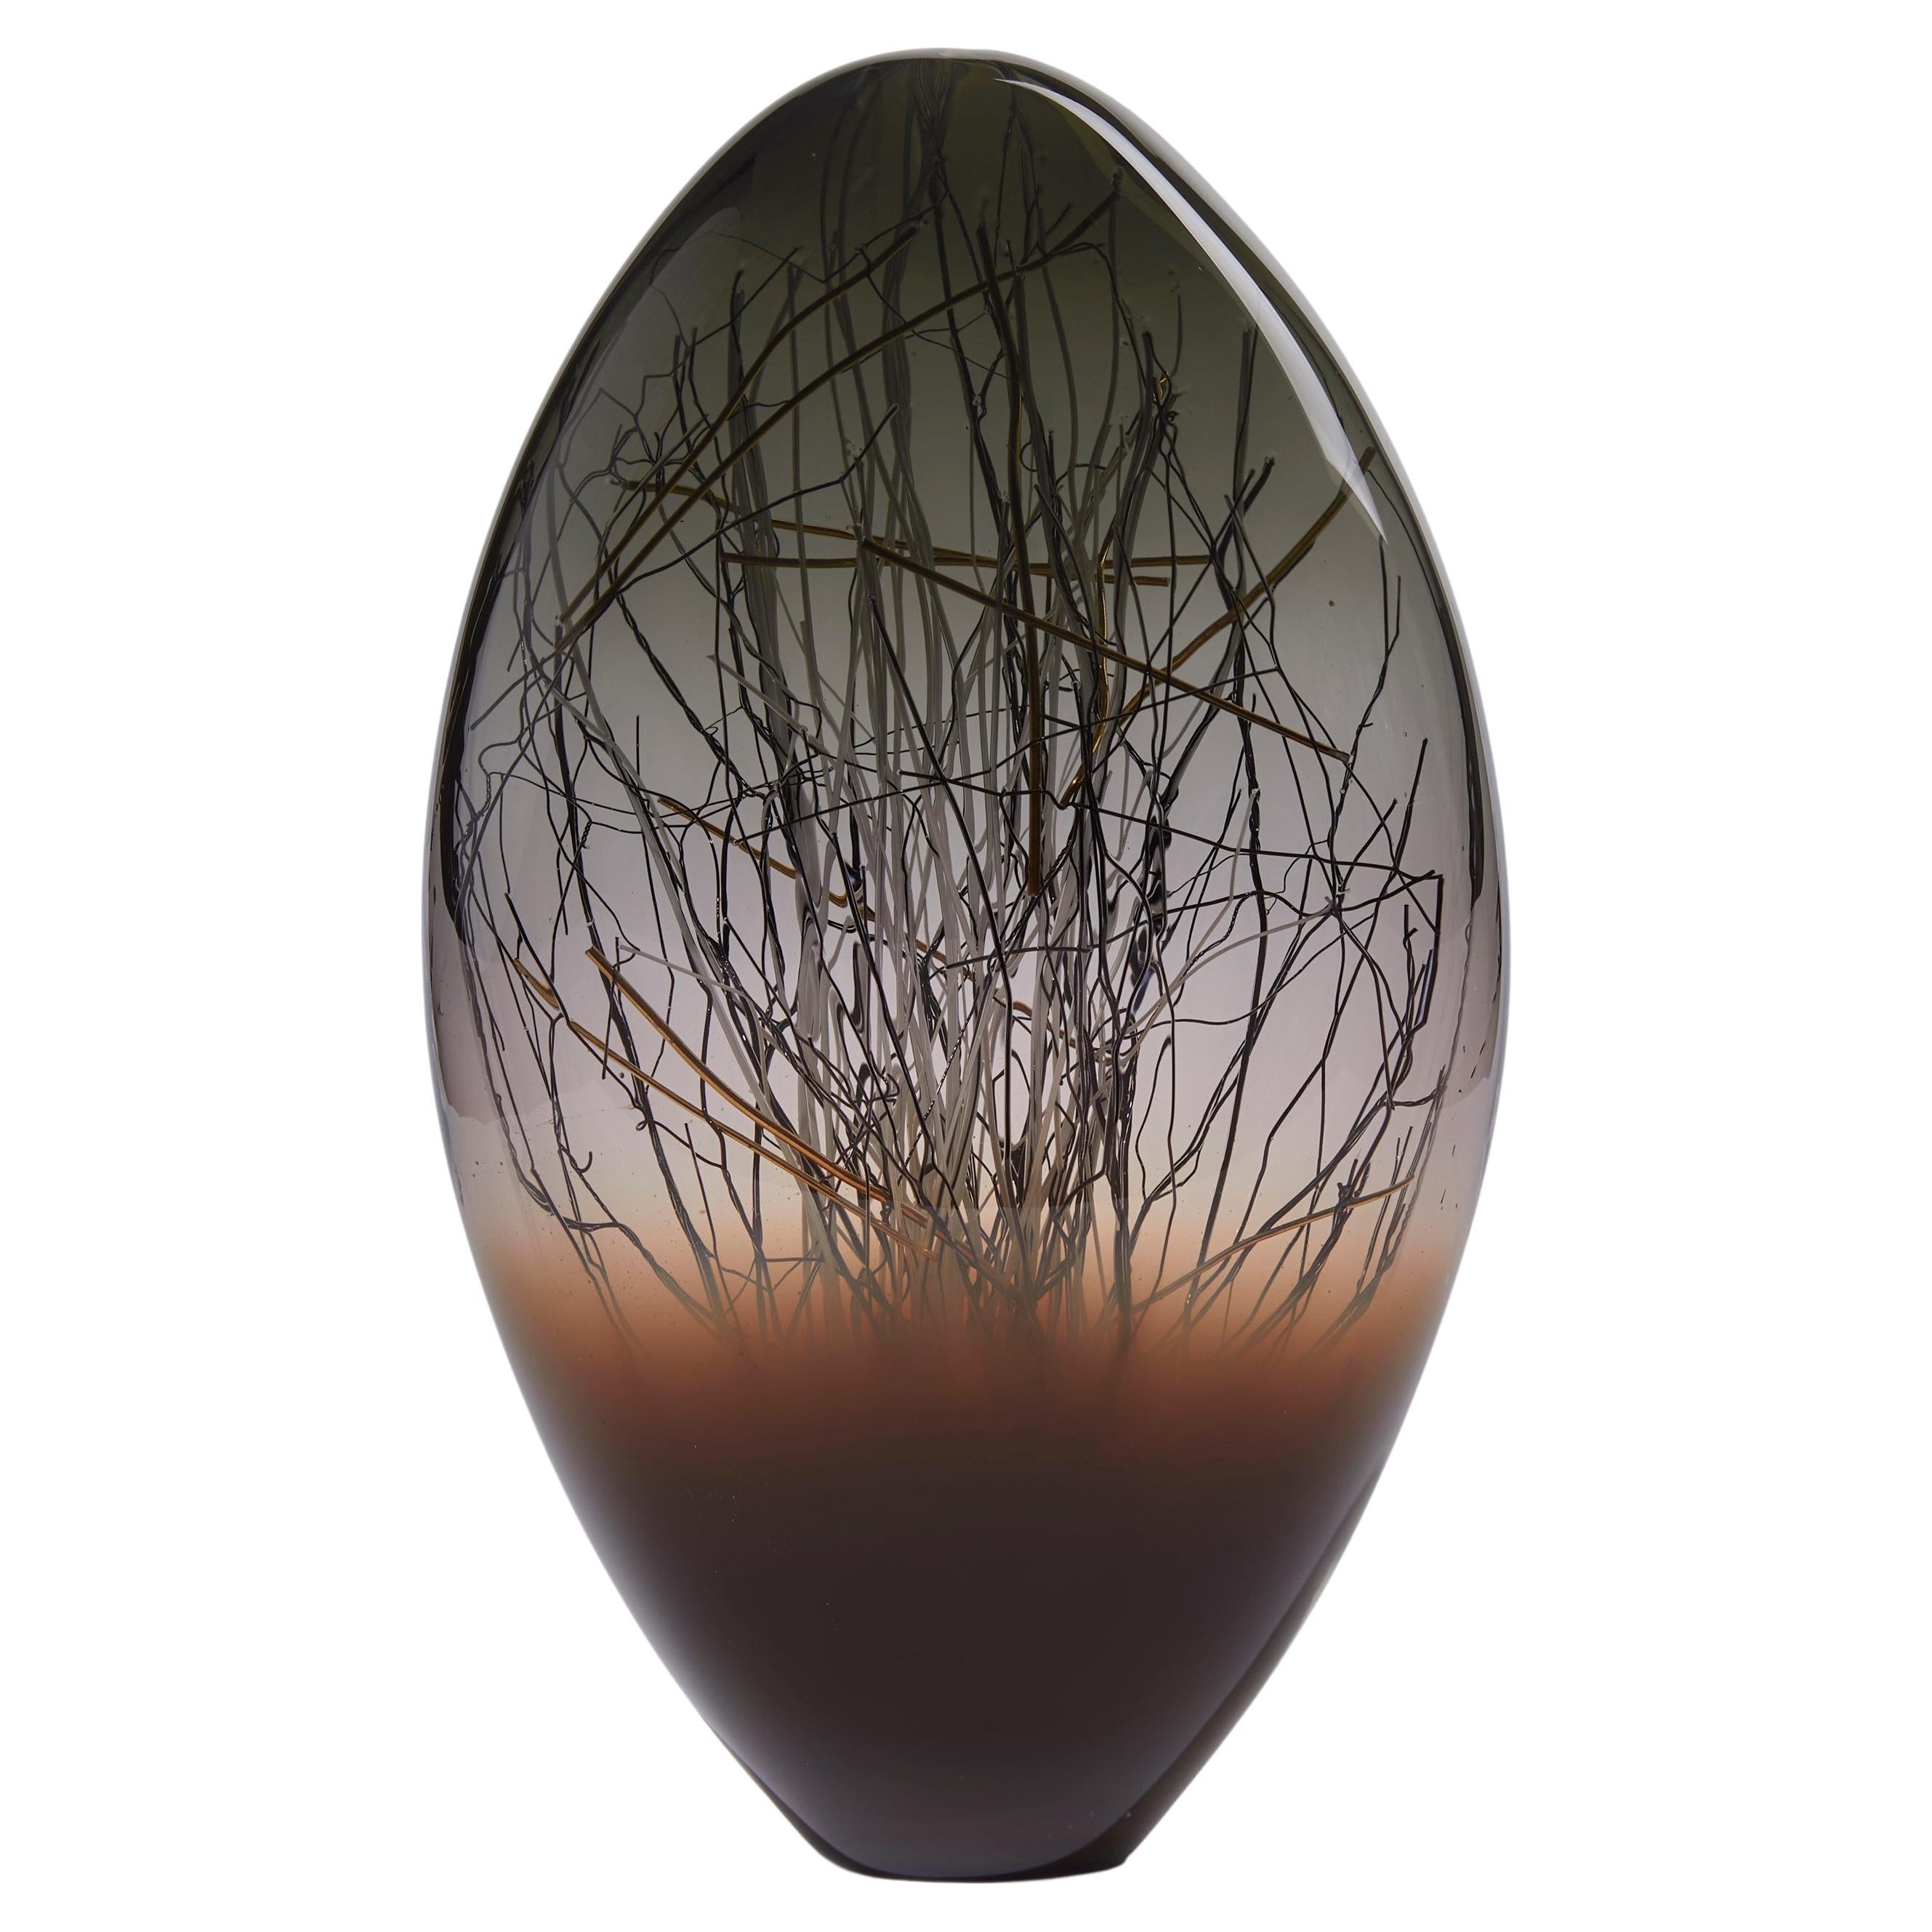 Ore Eclipse in Coffee & Grey, Brown/Black Glass Sculpture by Enemark & Thompson